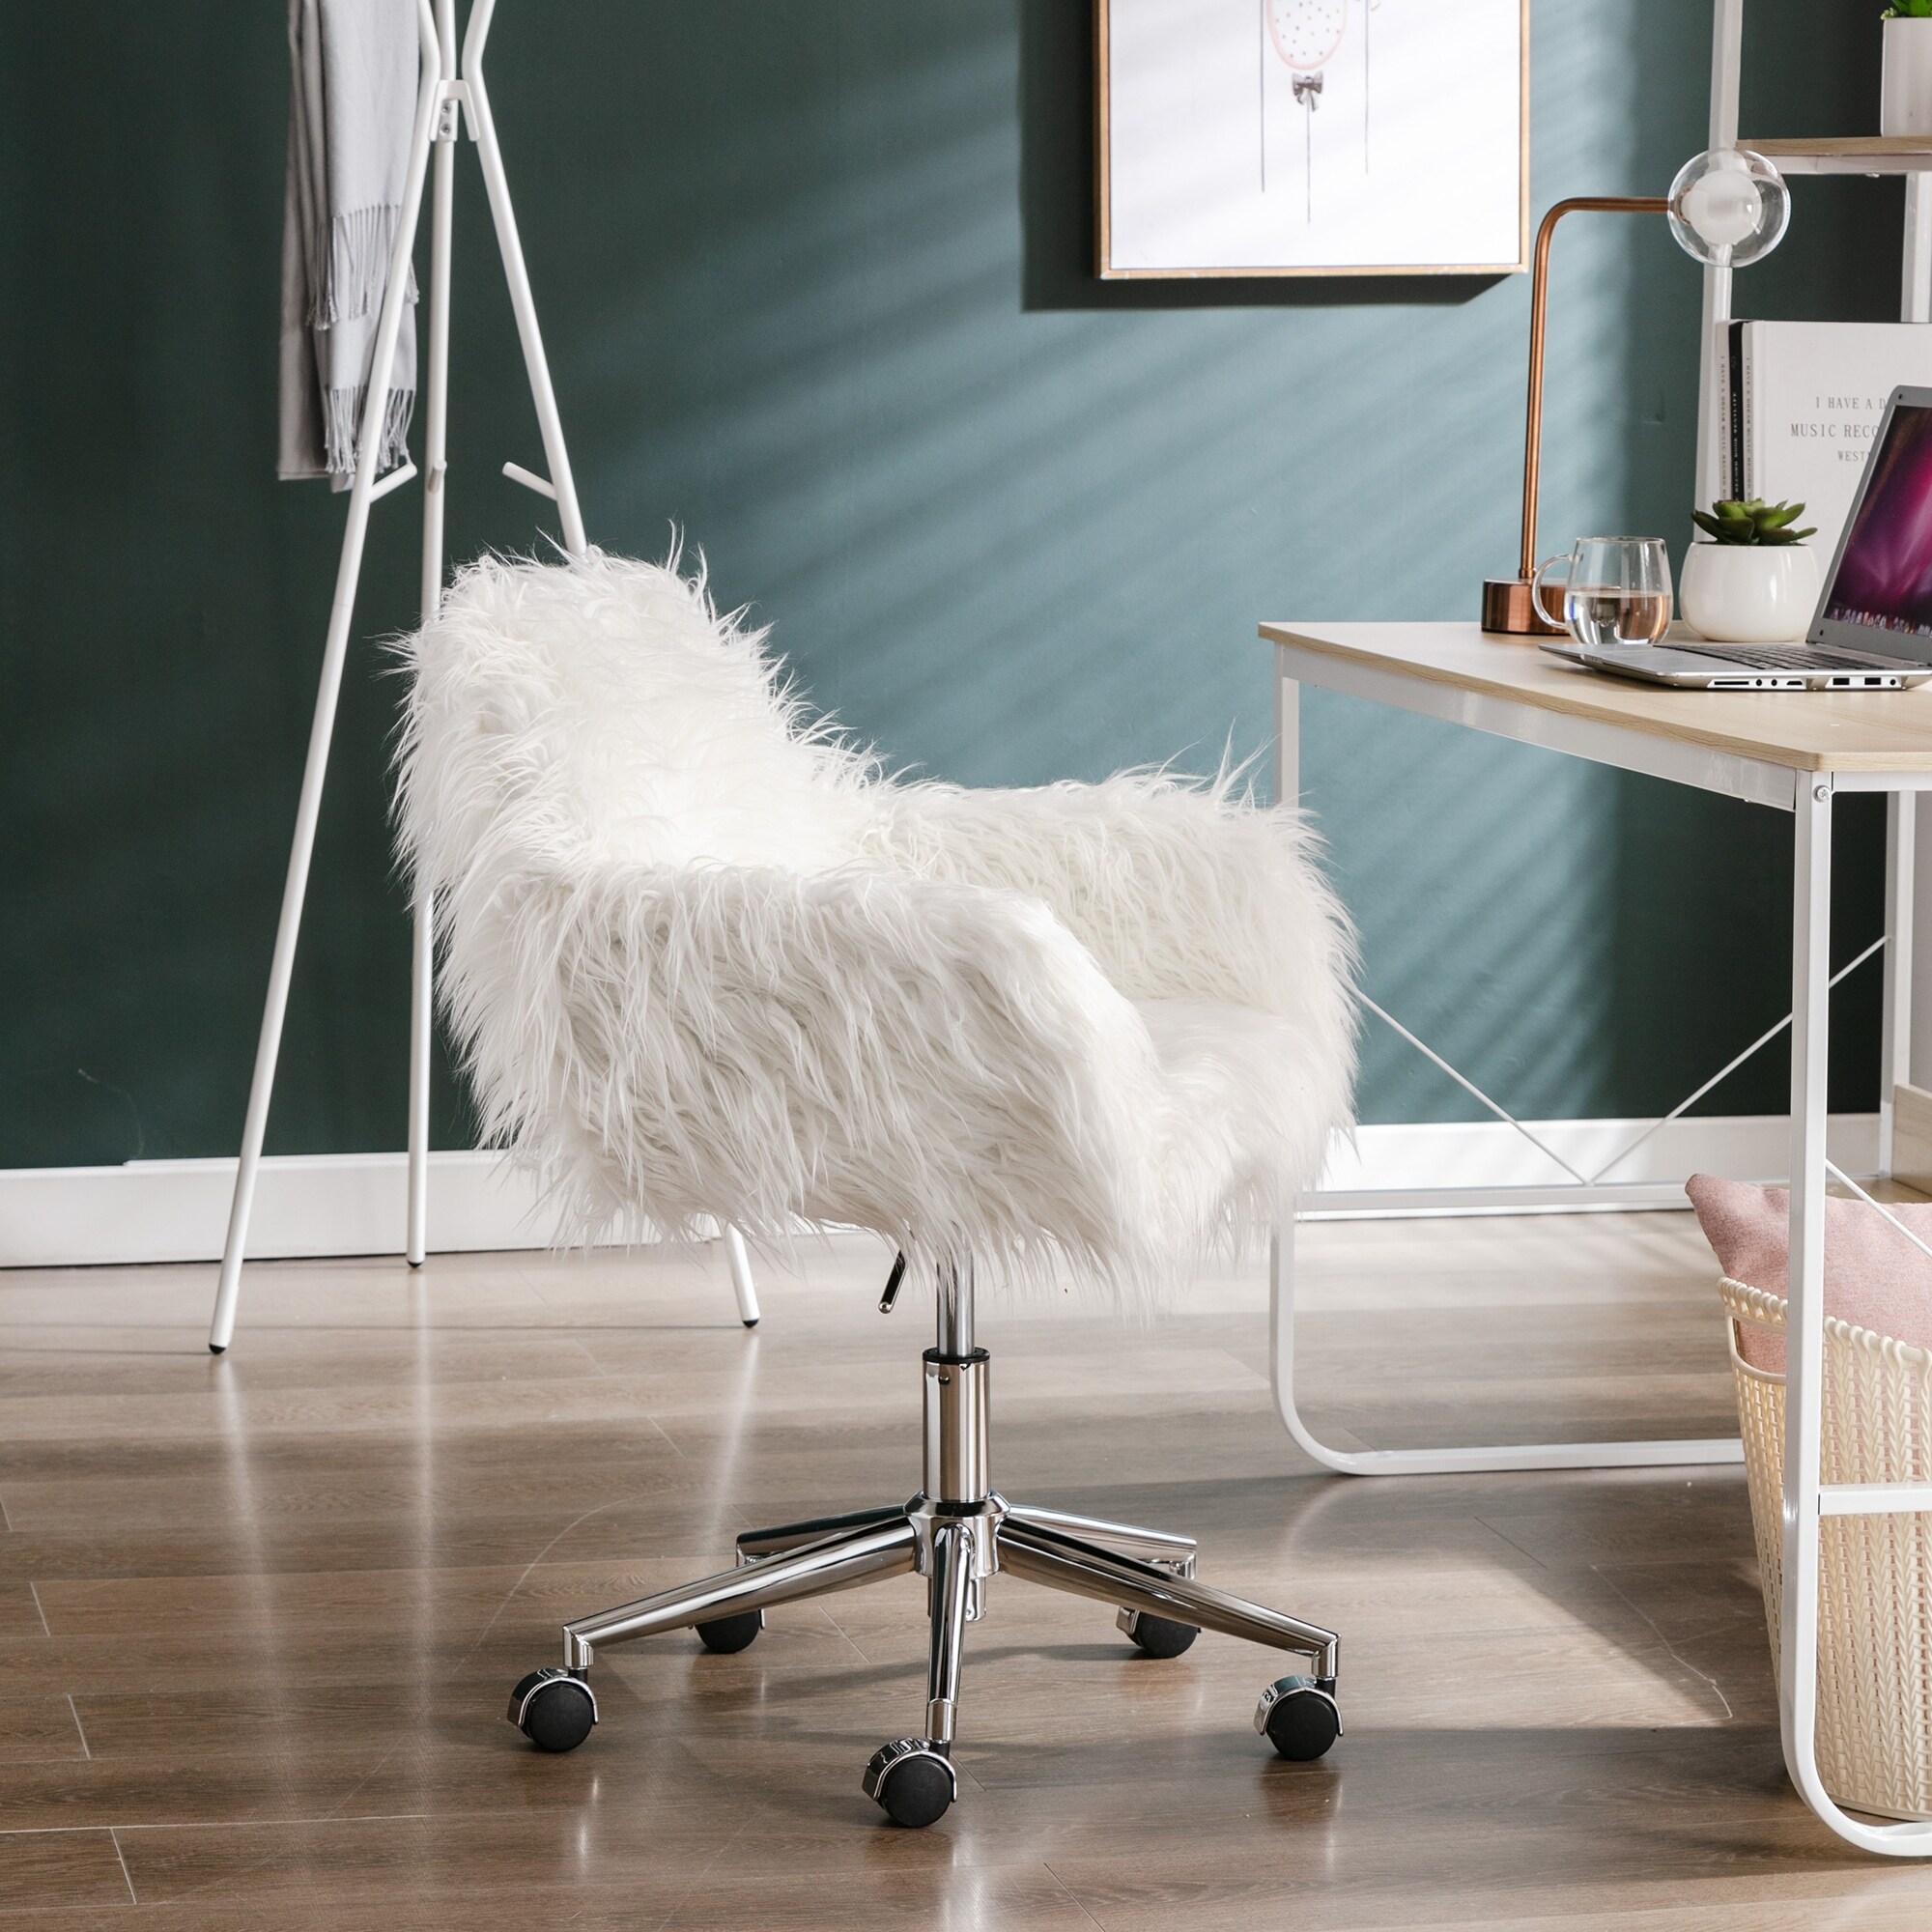 https://ak1.ostkcdn.com/images/products/is/images/direct/2f64a923eca61d57c1ce1940a80c8534bb770fc3/Modern-Fake-fur-home-office-chair%2C-fluffy-chair-for-girls%2C-makeup-vanity-Chair-with-Gold---Silver-Plating-Base.jpg